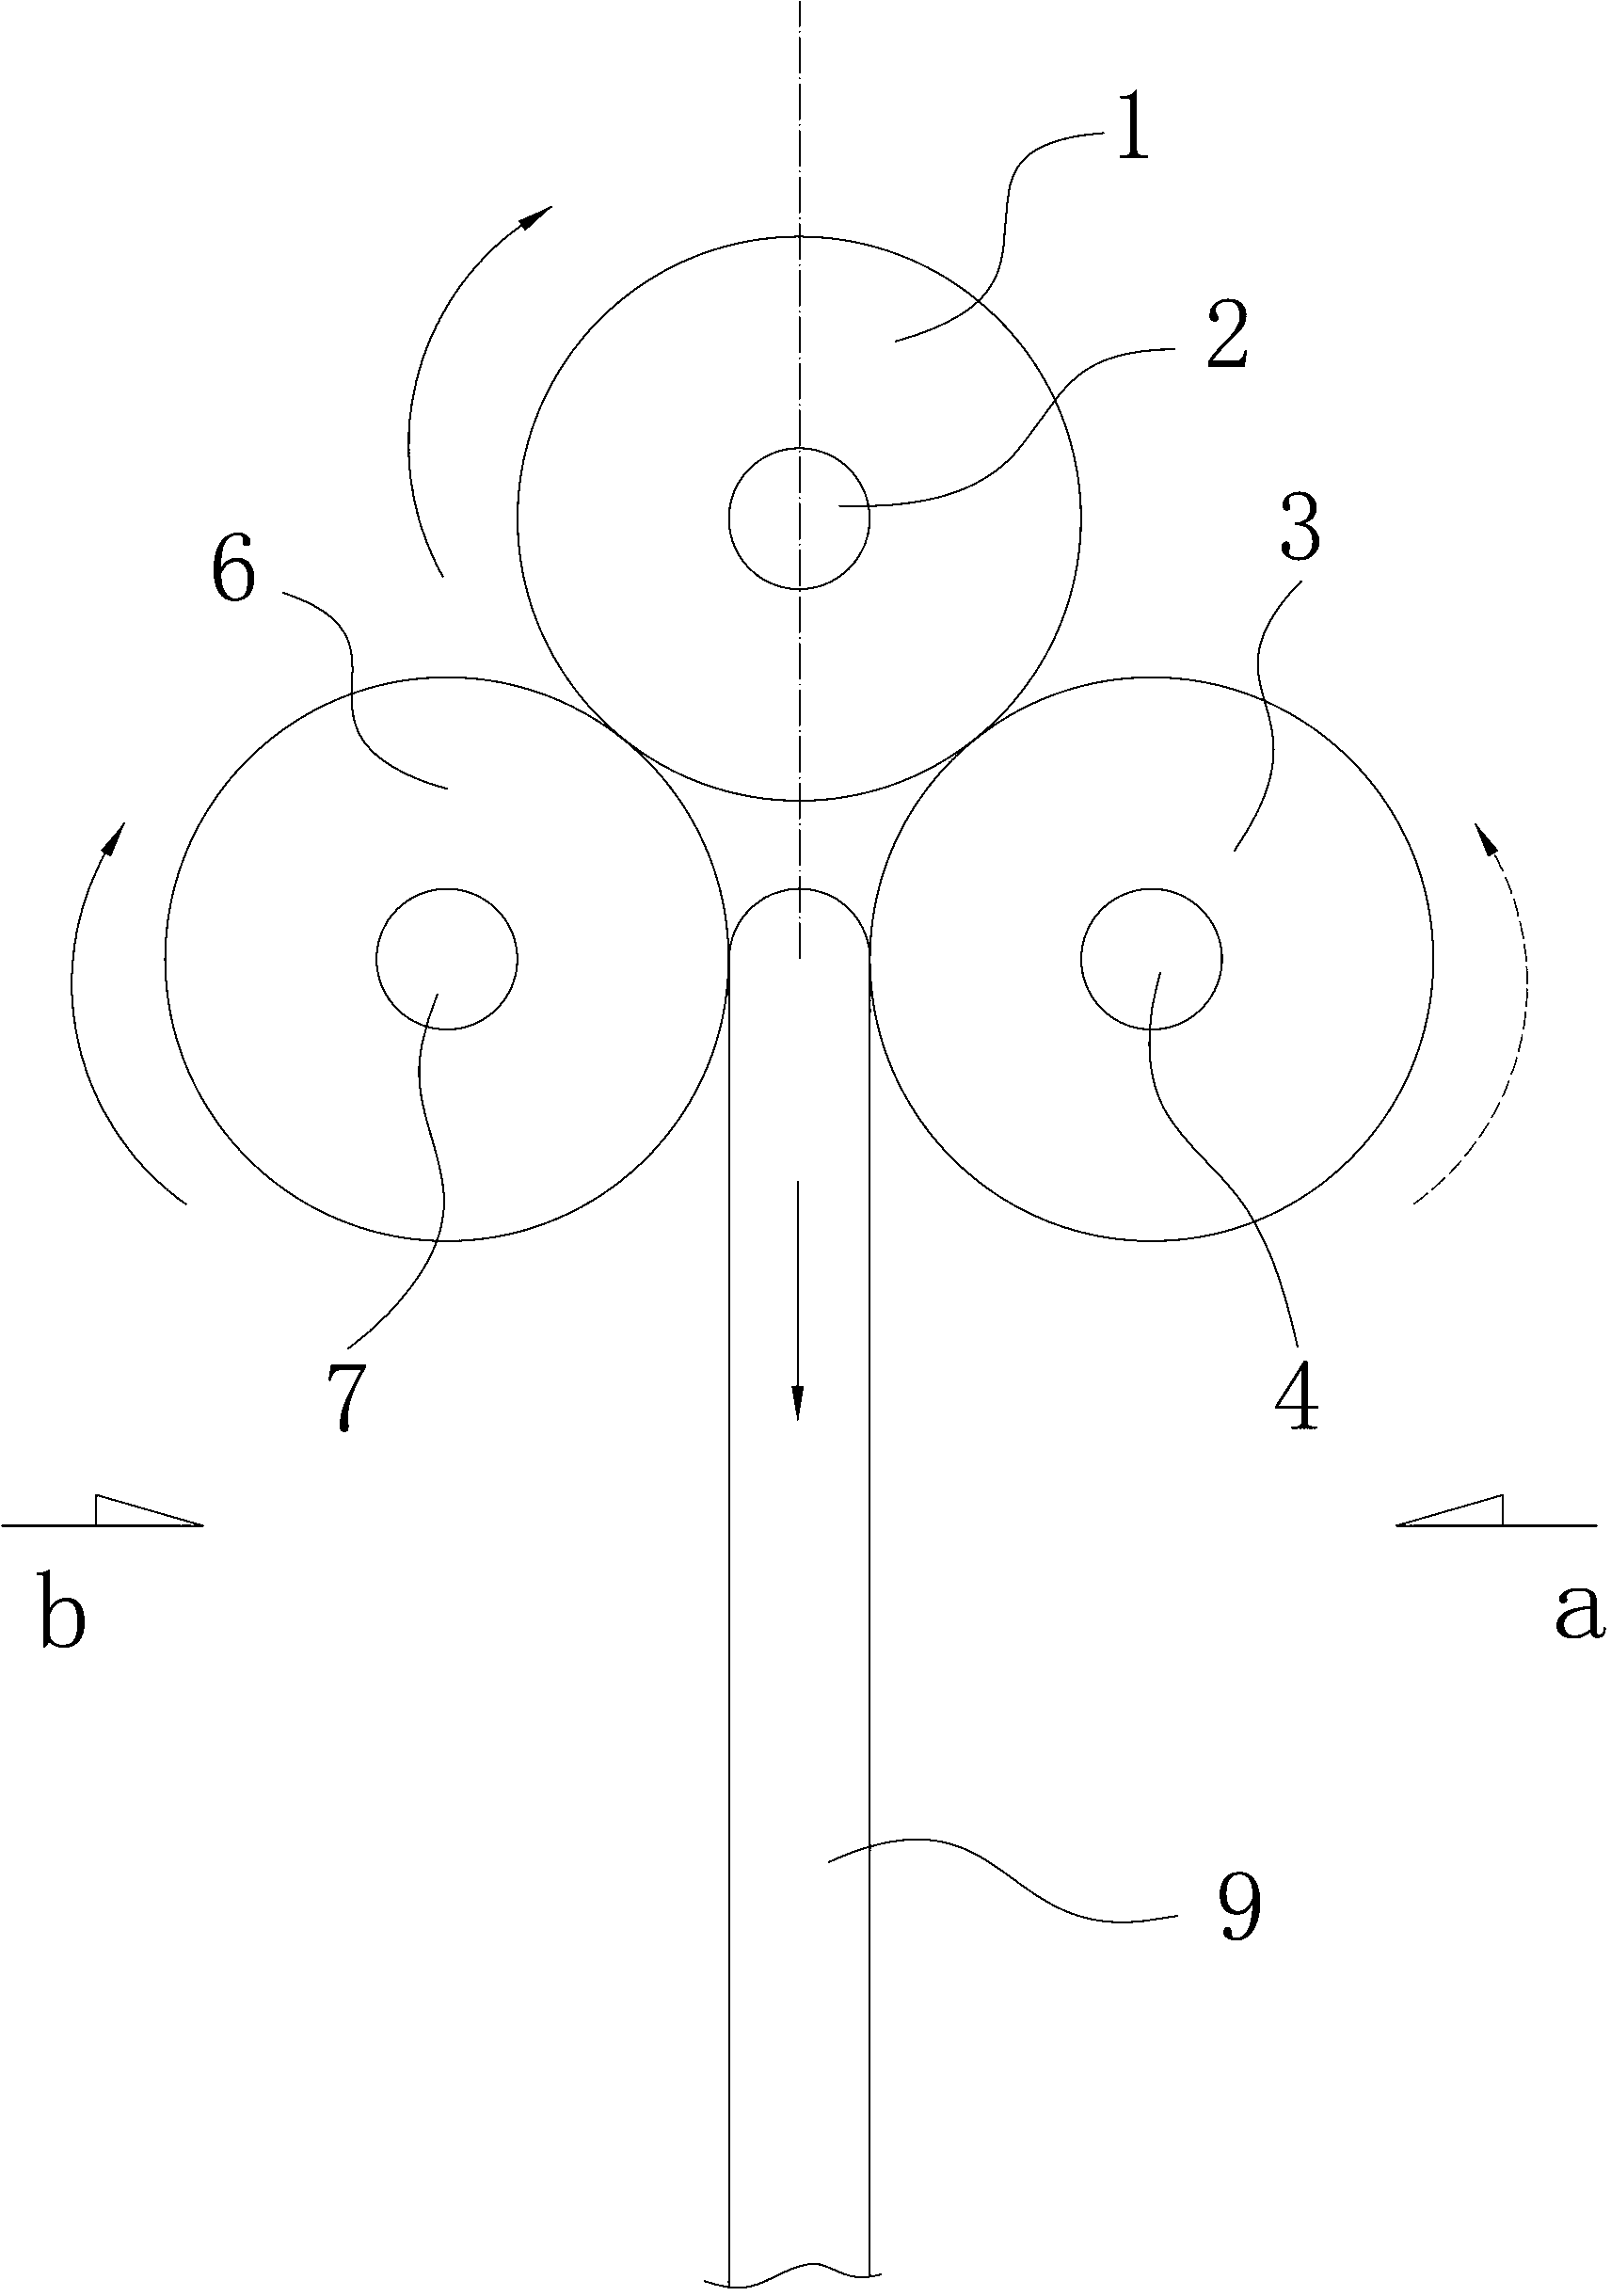 Device capable of changing straight reciprocating movement to continuous circular movement